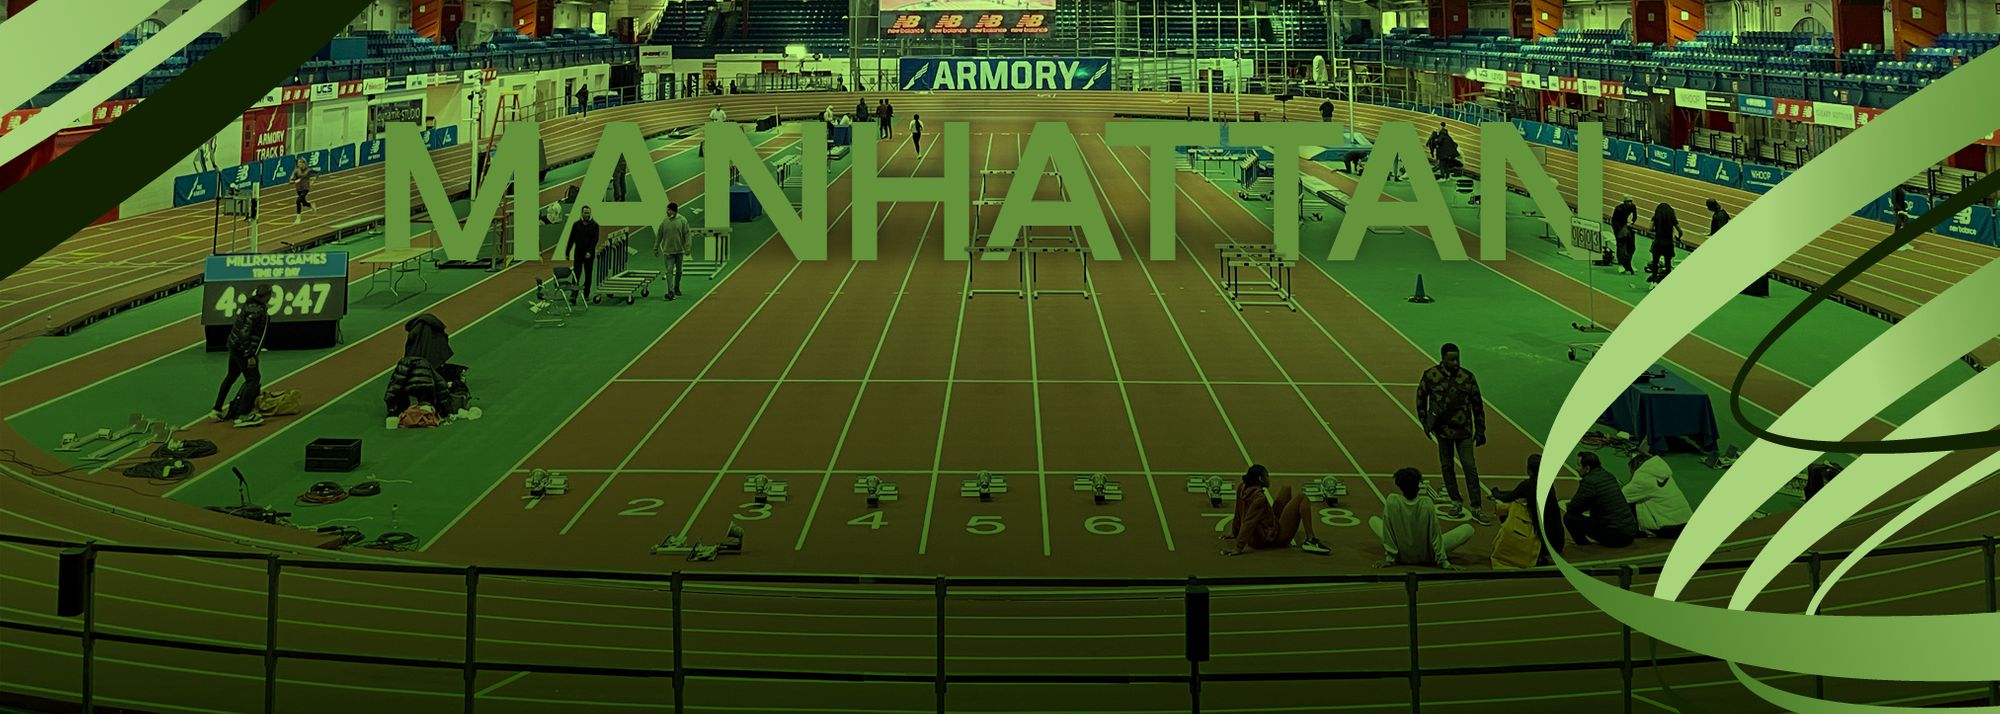 The 2022 World Athletics Indoor Tour Gold series continues on Saturday with the Millrose Games.